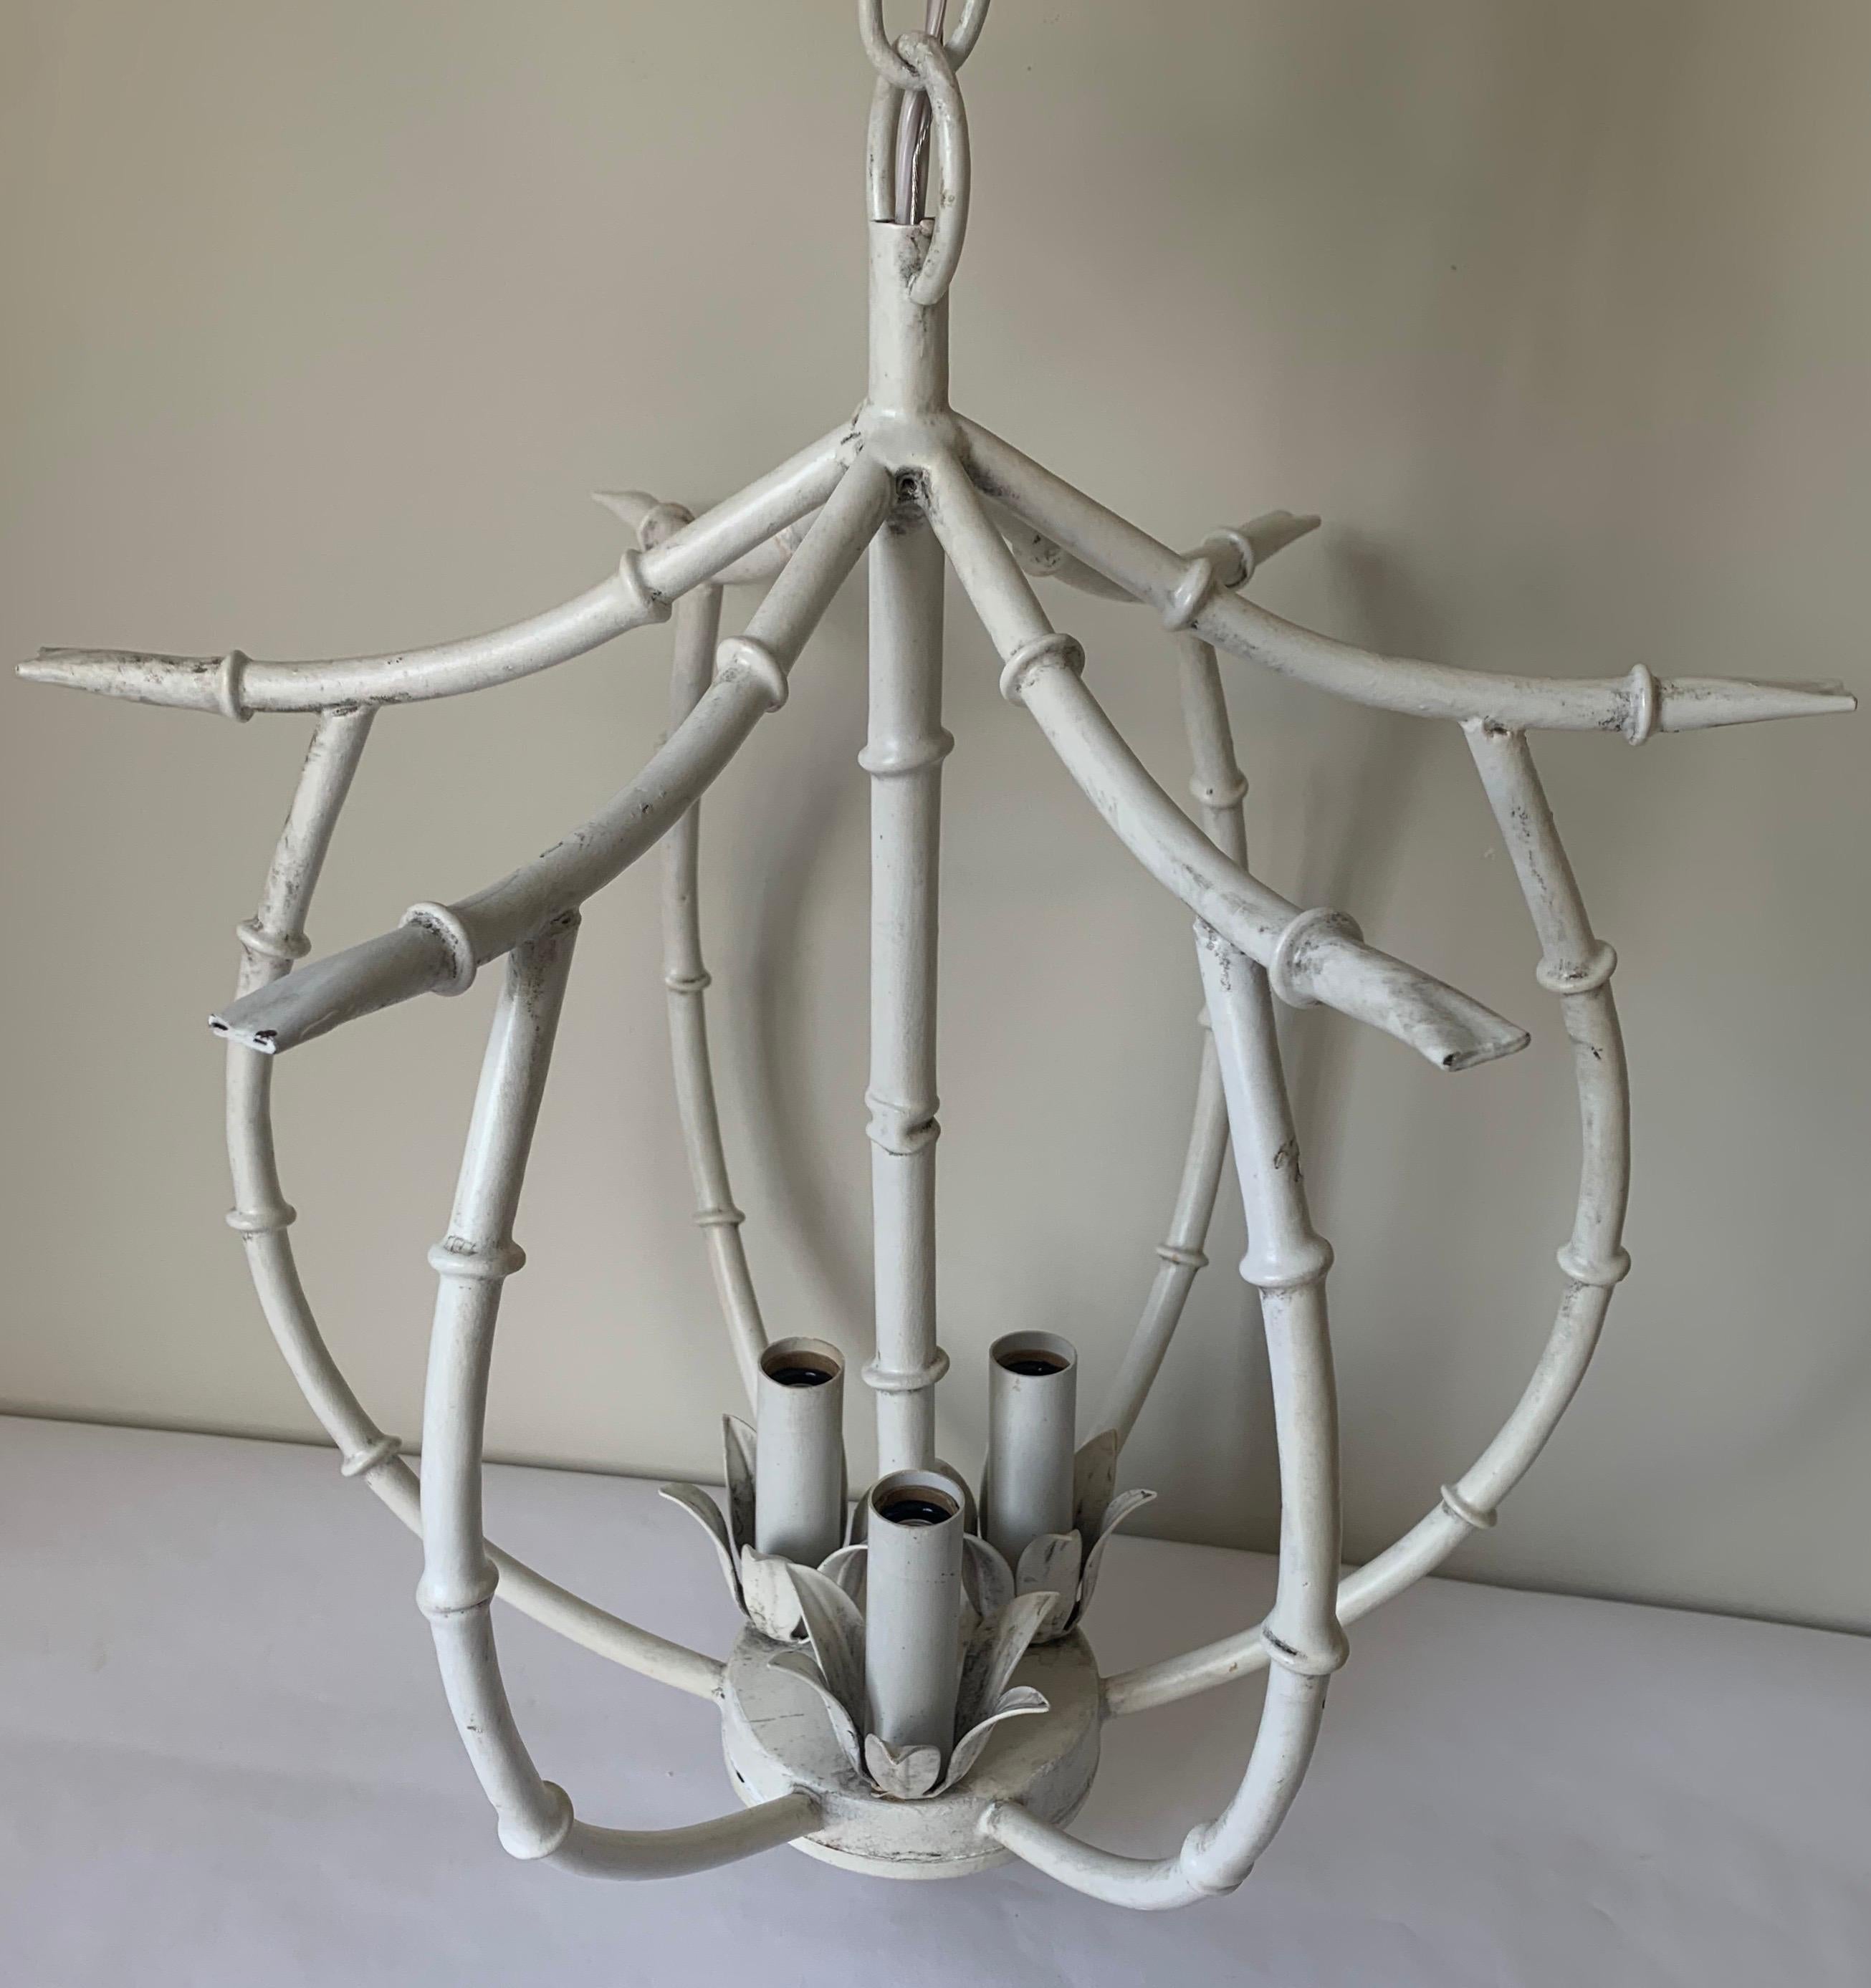 White faux bamboo metal petite chandelier. Newly repainted in an antique white finish. Newly rewired with new chain and canopy painted to match. 36”L chain included. Fixture takes three chandelier bulbs (not included).